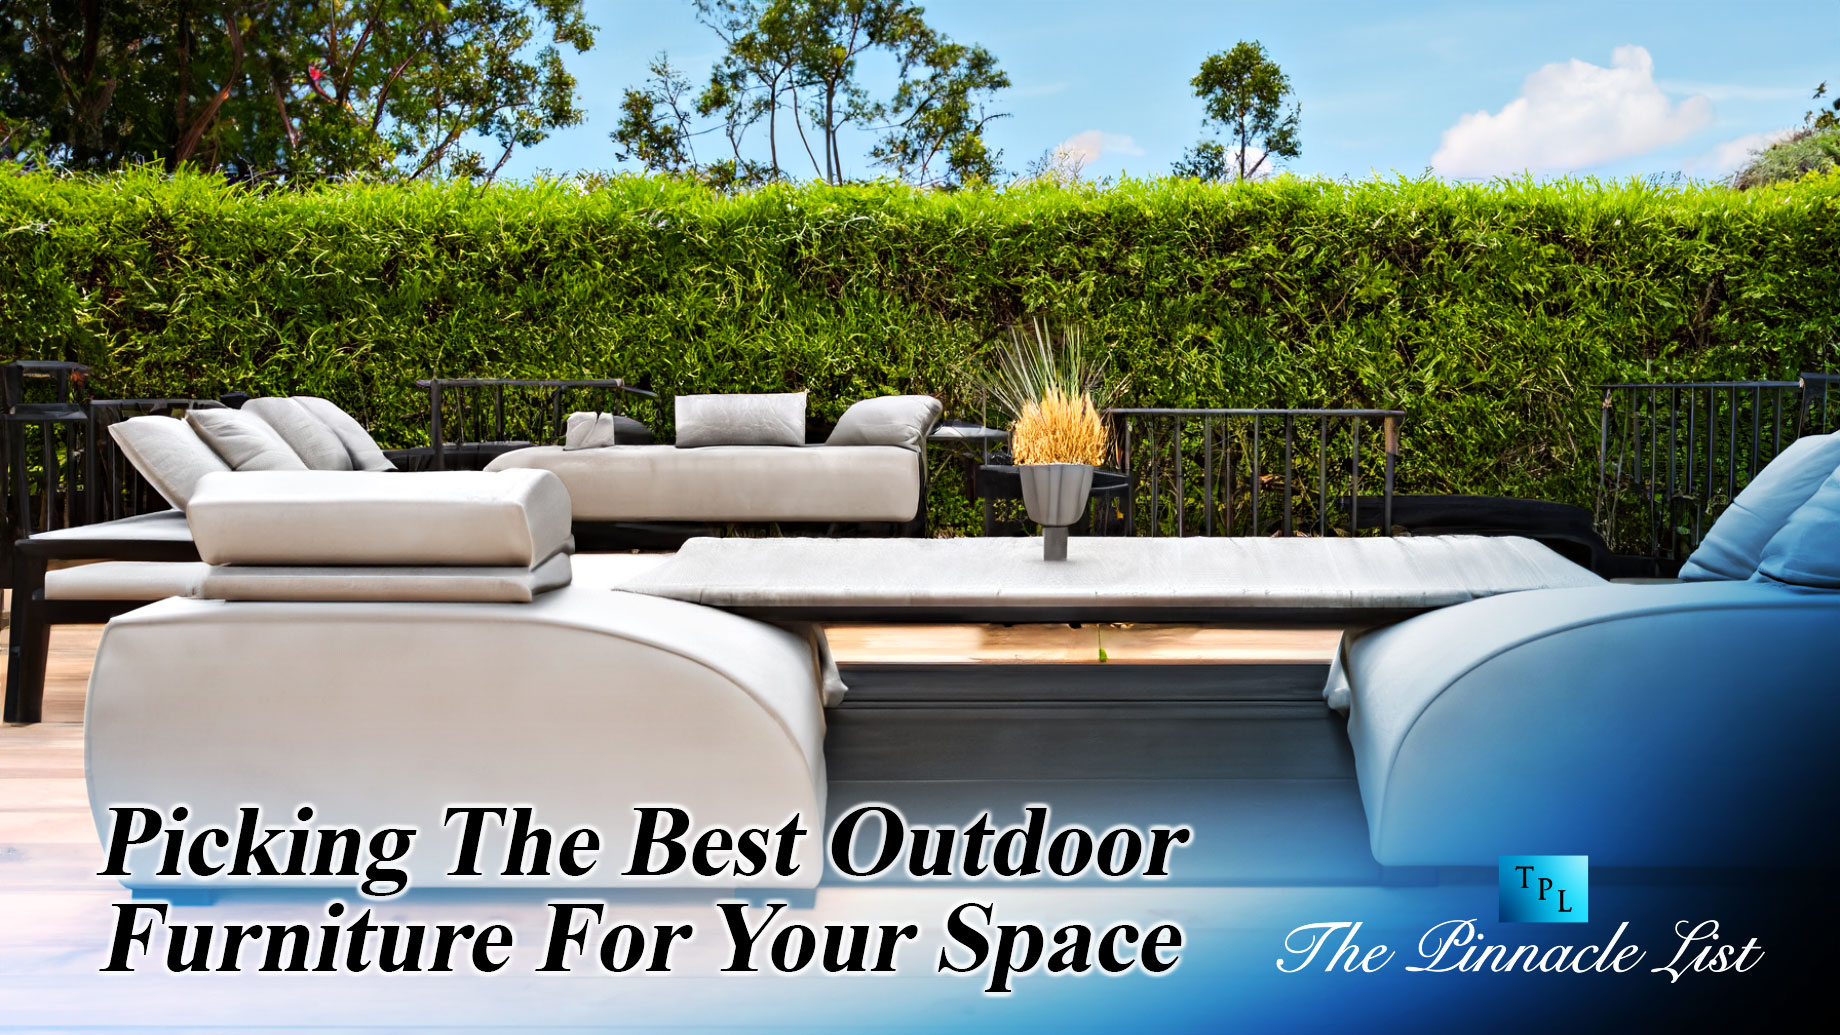 Picking The Best Outdoor Furniture For Your Space